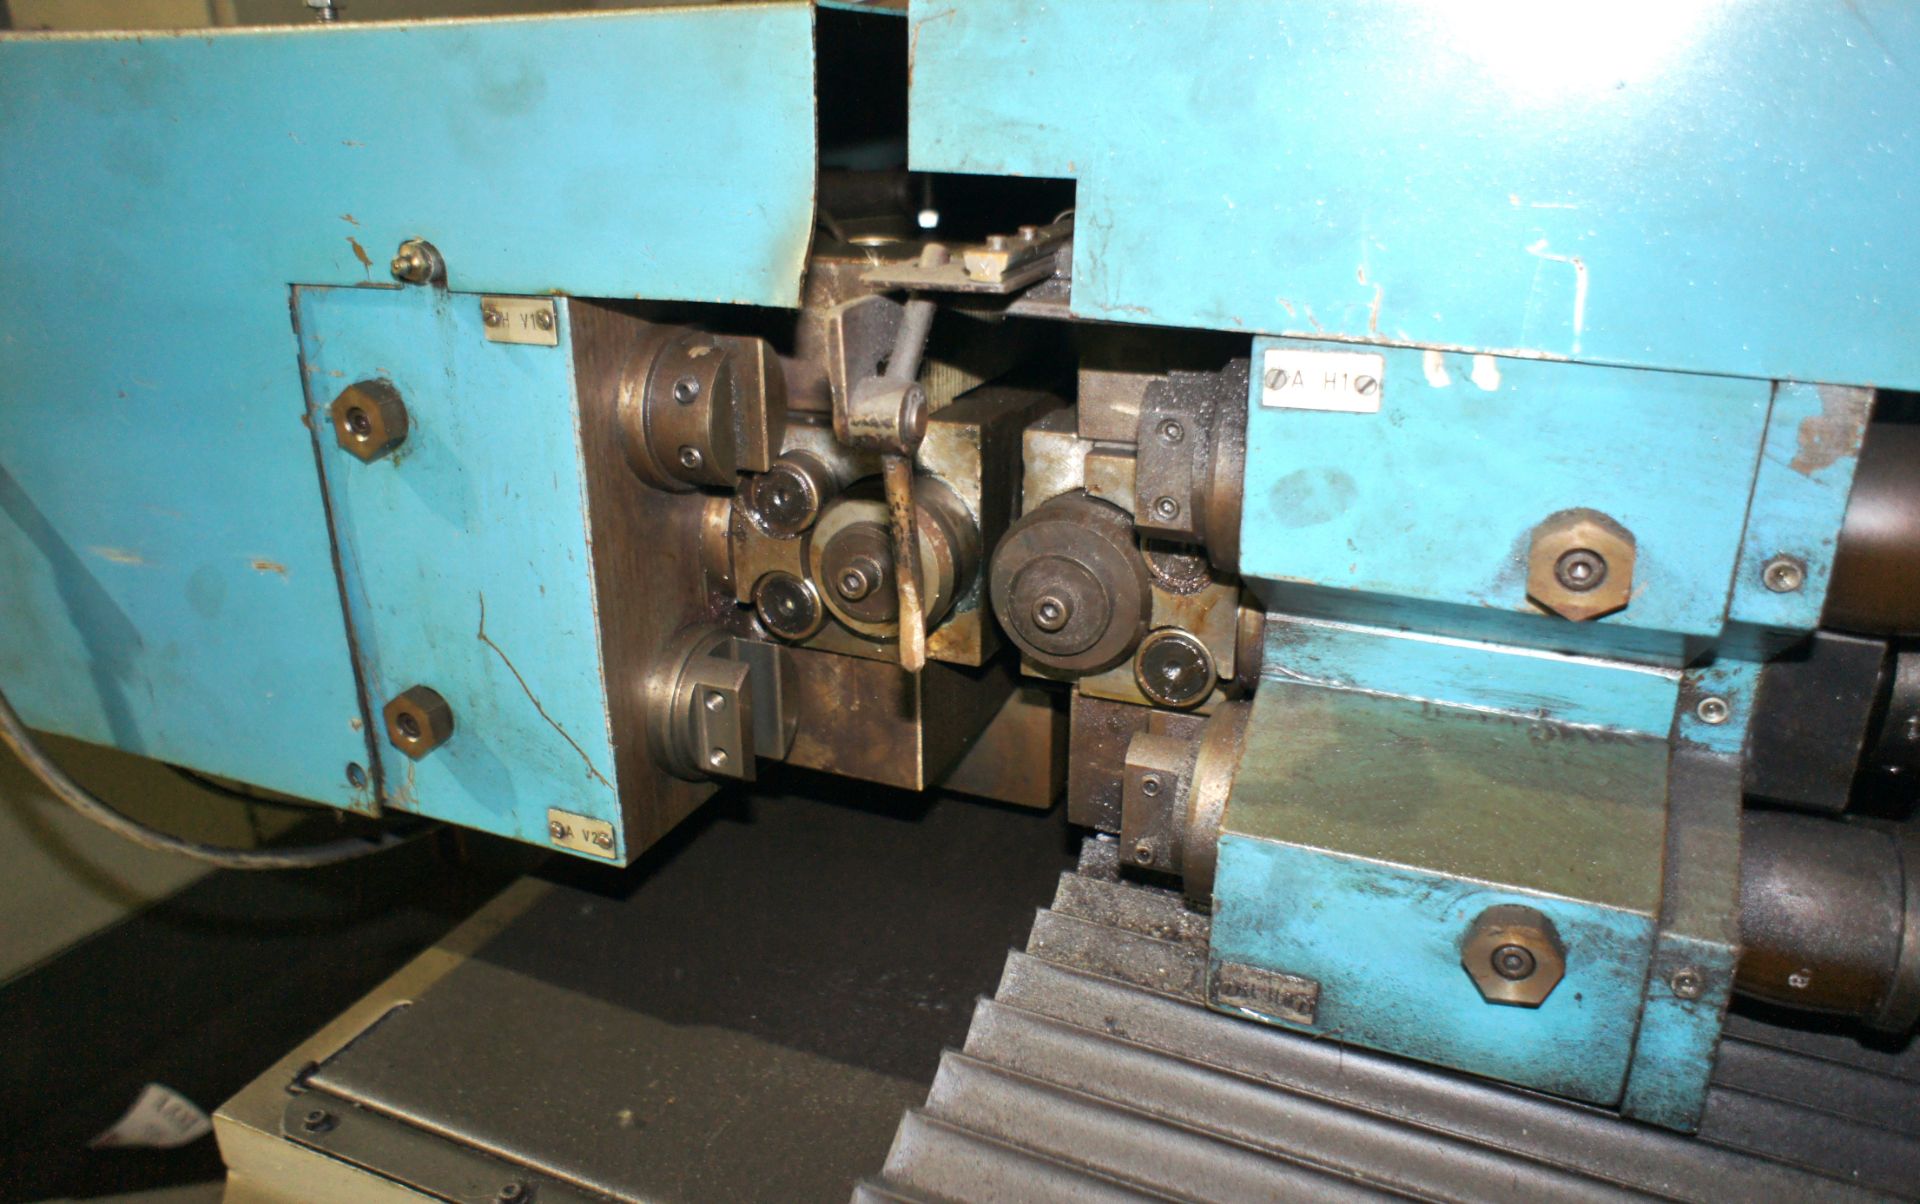 Mummenhoff Technologies PSR 700 automatic smithing and tensioning machine, Serial no. 10309 (2003) - Image 6 of 9